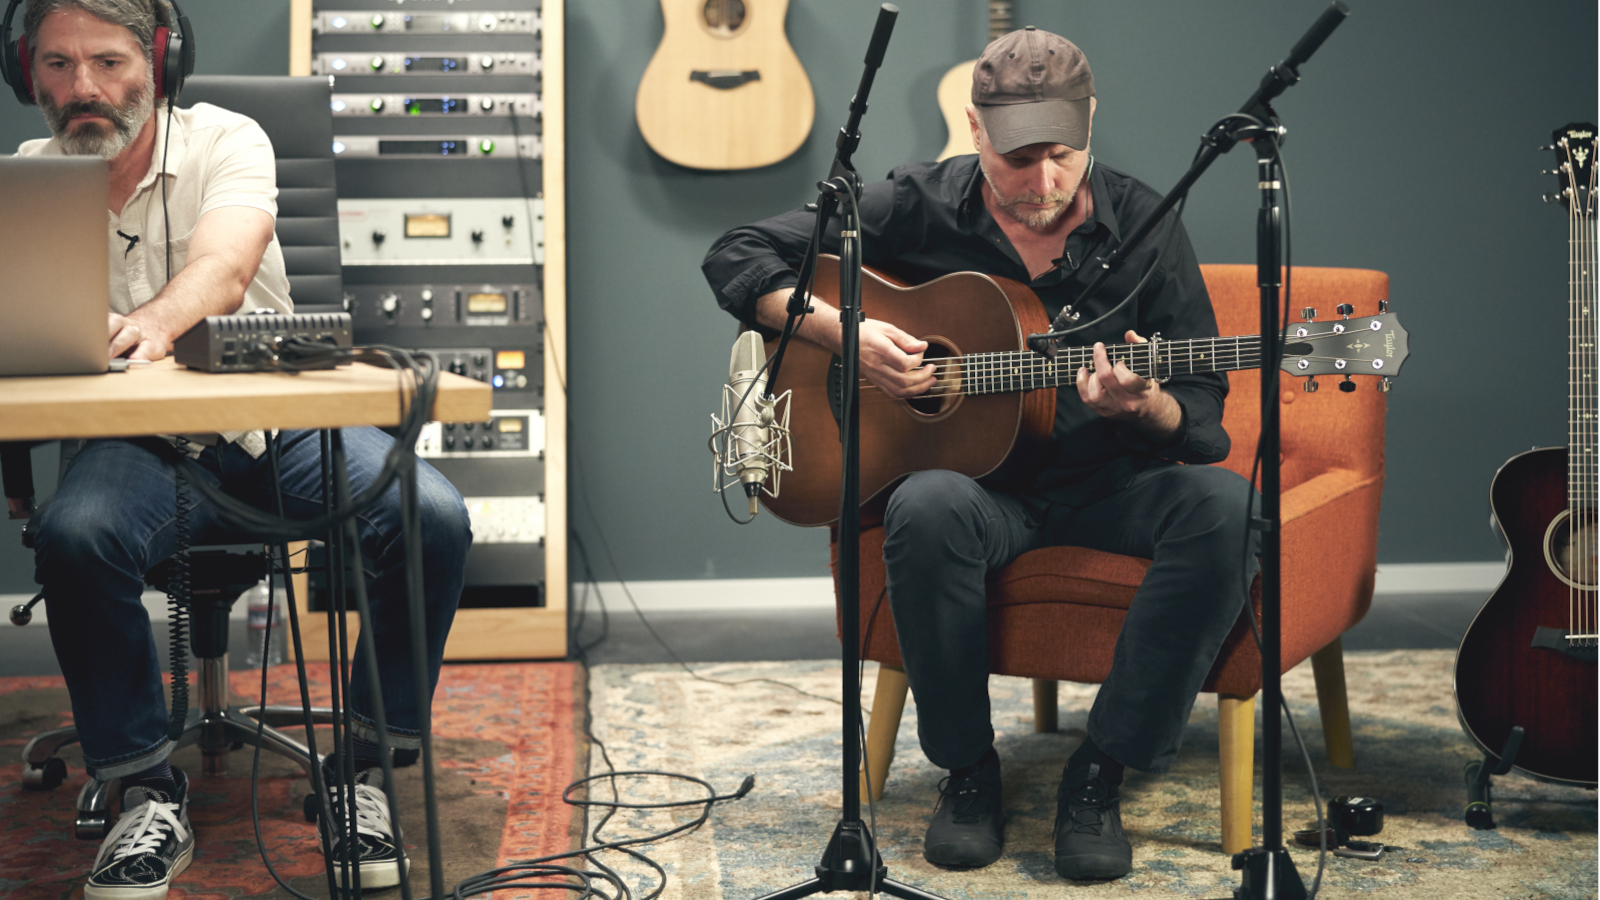 Get Some Acoustic Guitar Recording Tips from a Nashville Studio